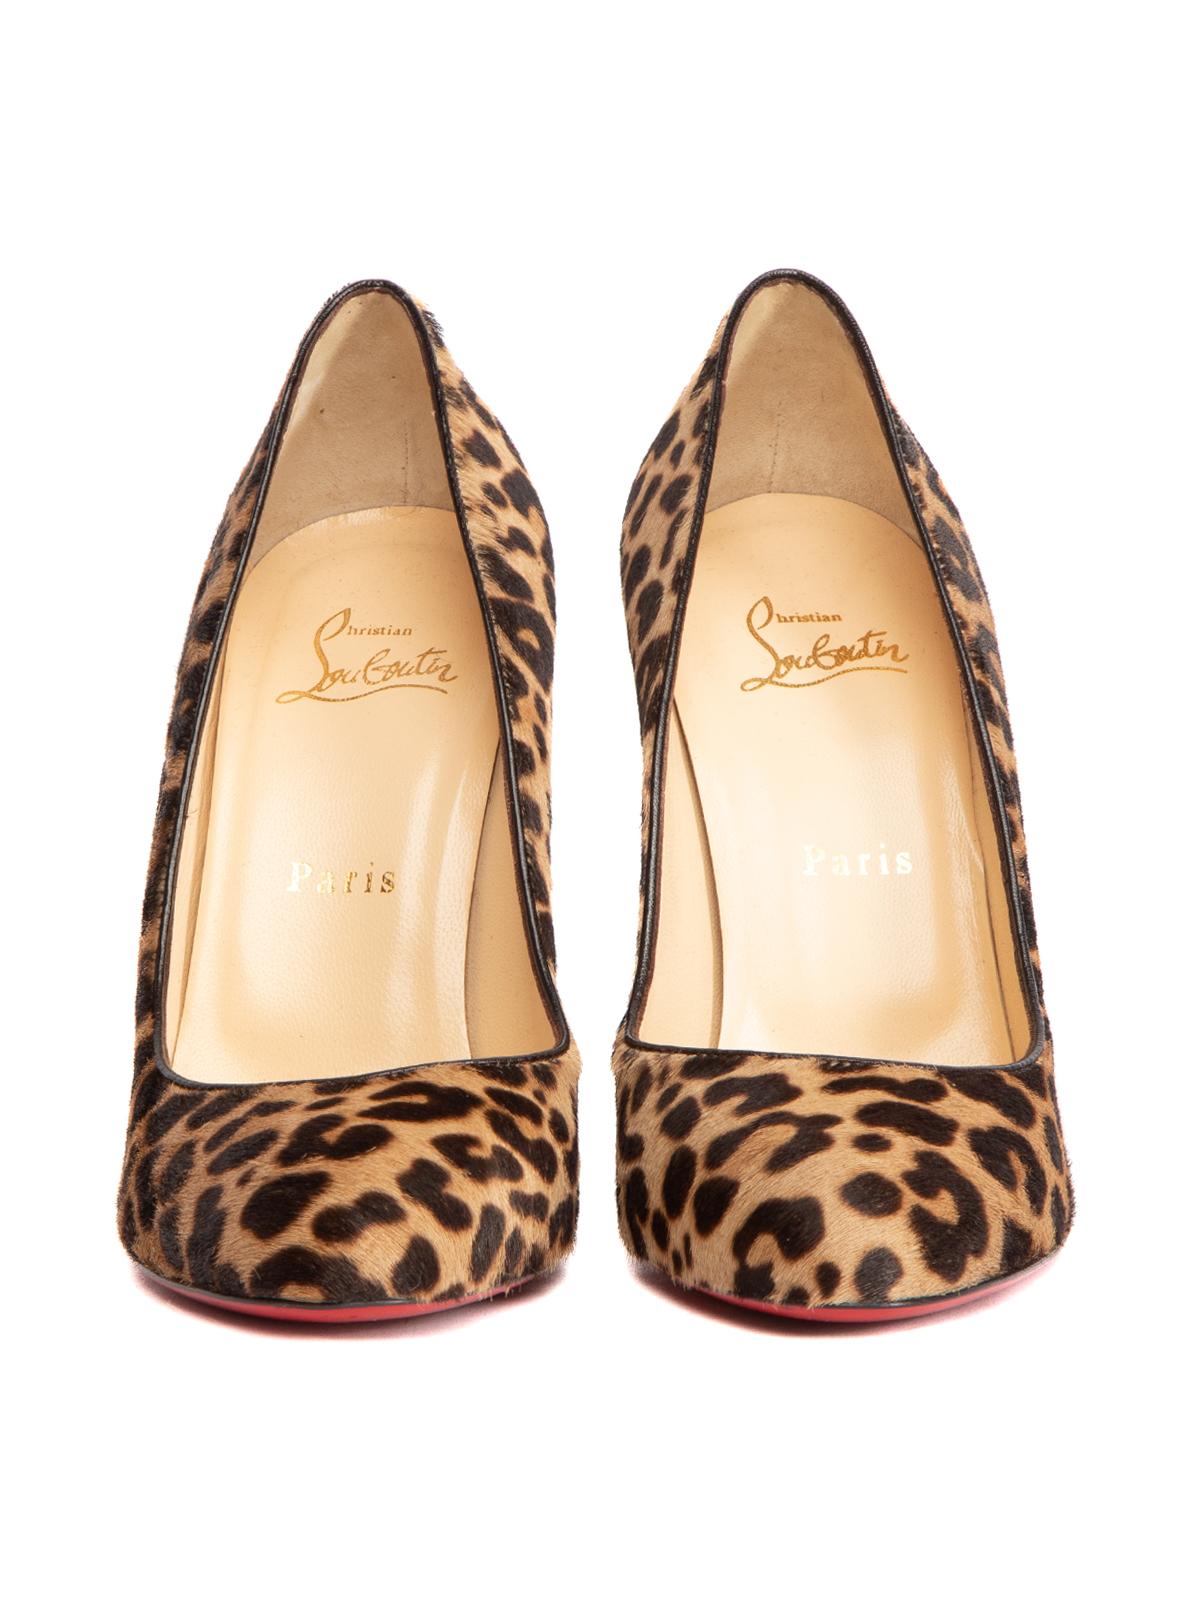 Pre-Loved Christian Louboutin Women's Round Toe Pony Hair Leopard Print Heels In Excellent Condition In London, GB